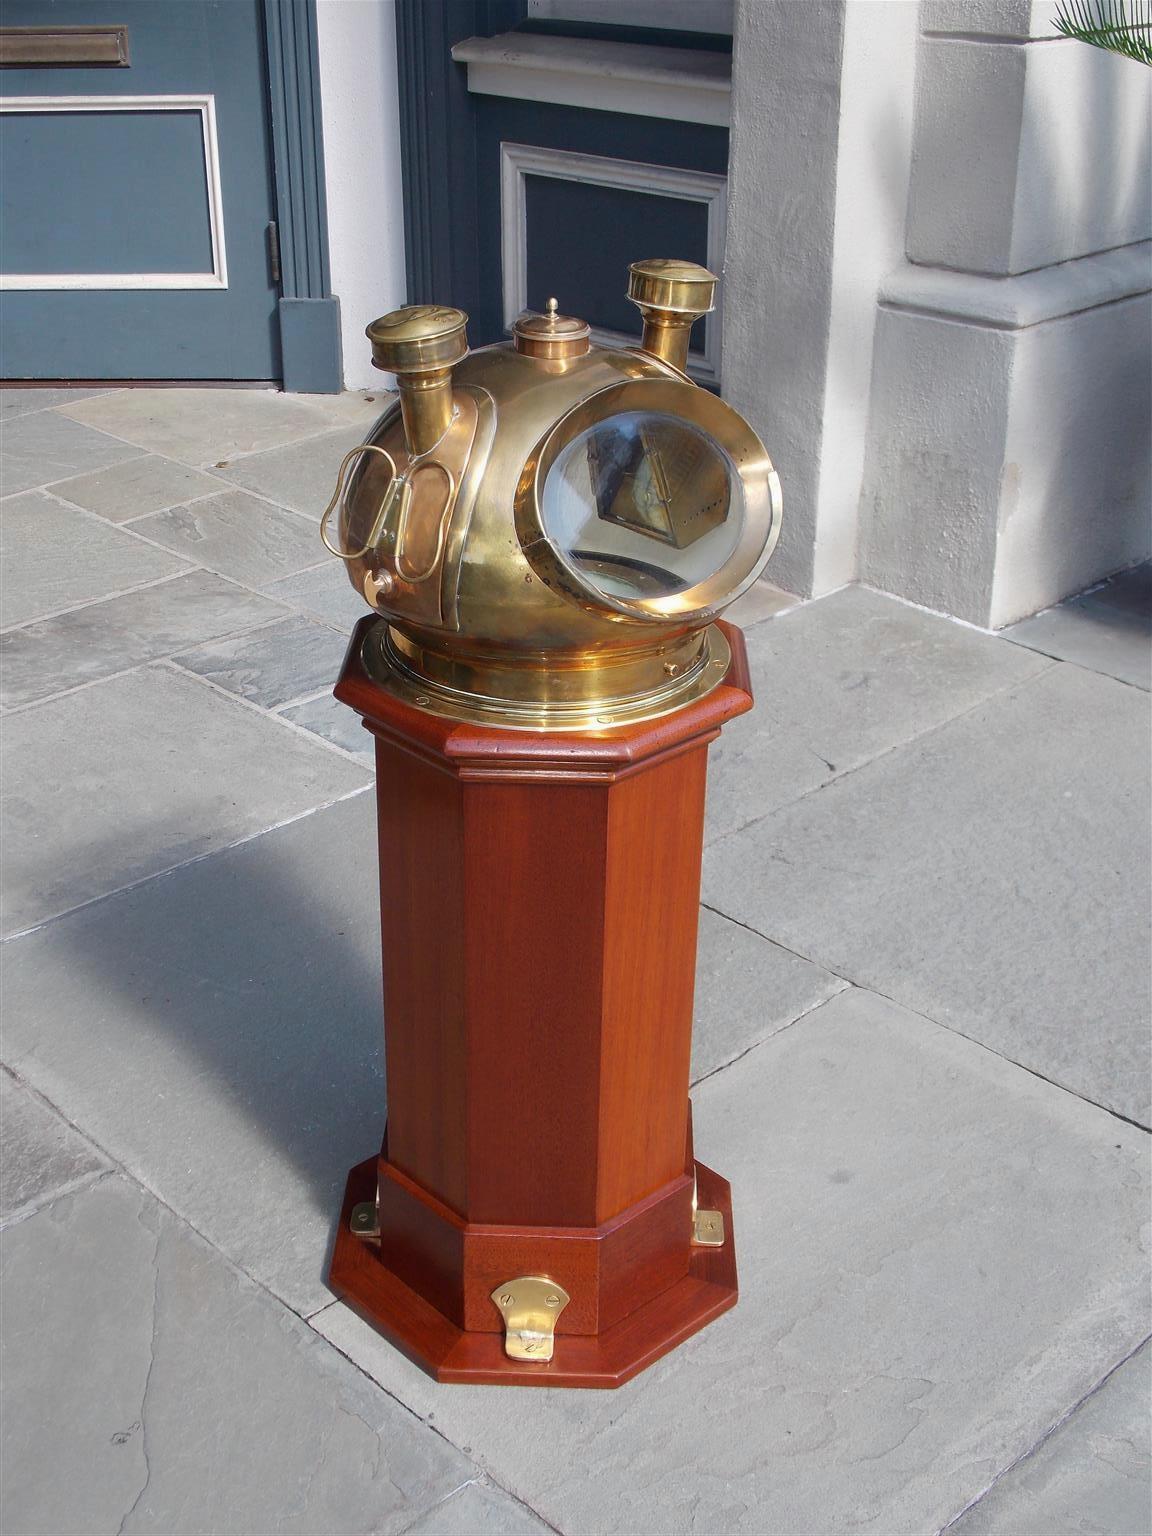 American mahogany ship binnacle with a brass-mounted dome helmet, internal dry compass by Ritchie of Boston, flanking removable burners with the original fonts and resting on an octagonal brass-mounted base. Binnacle maker Riggs & Brothers of